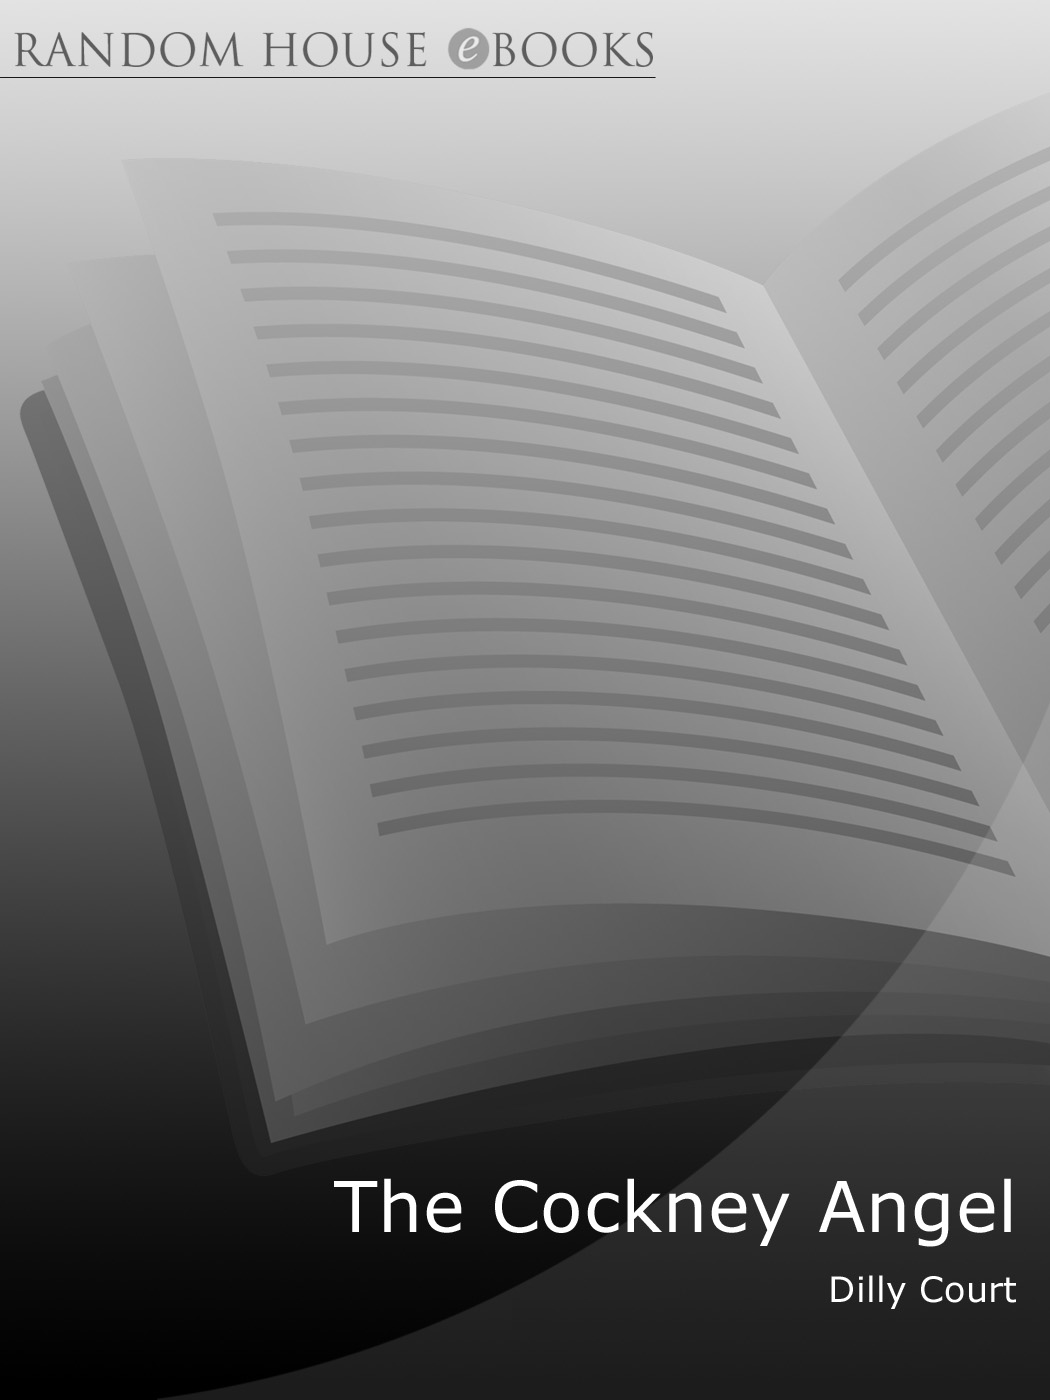 The Cockney Angel by Dilly Court